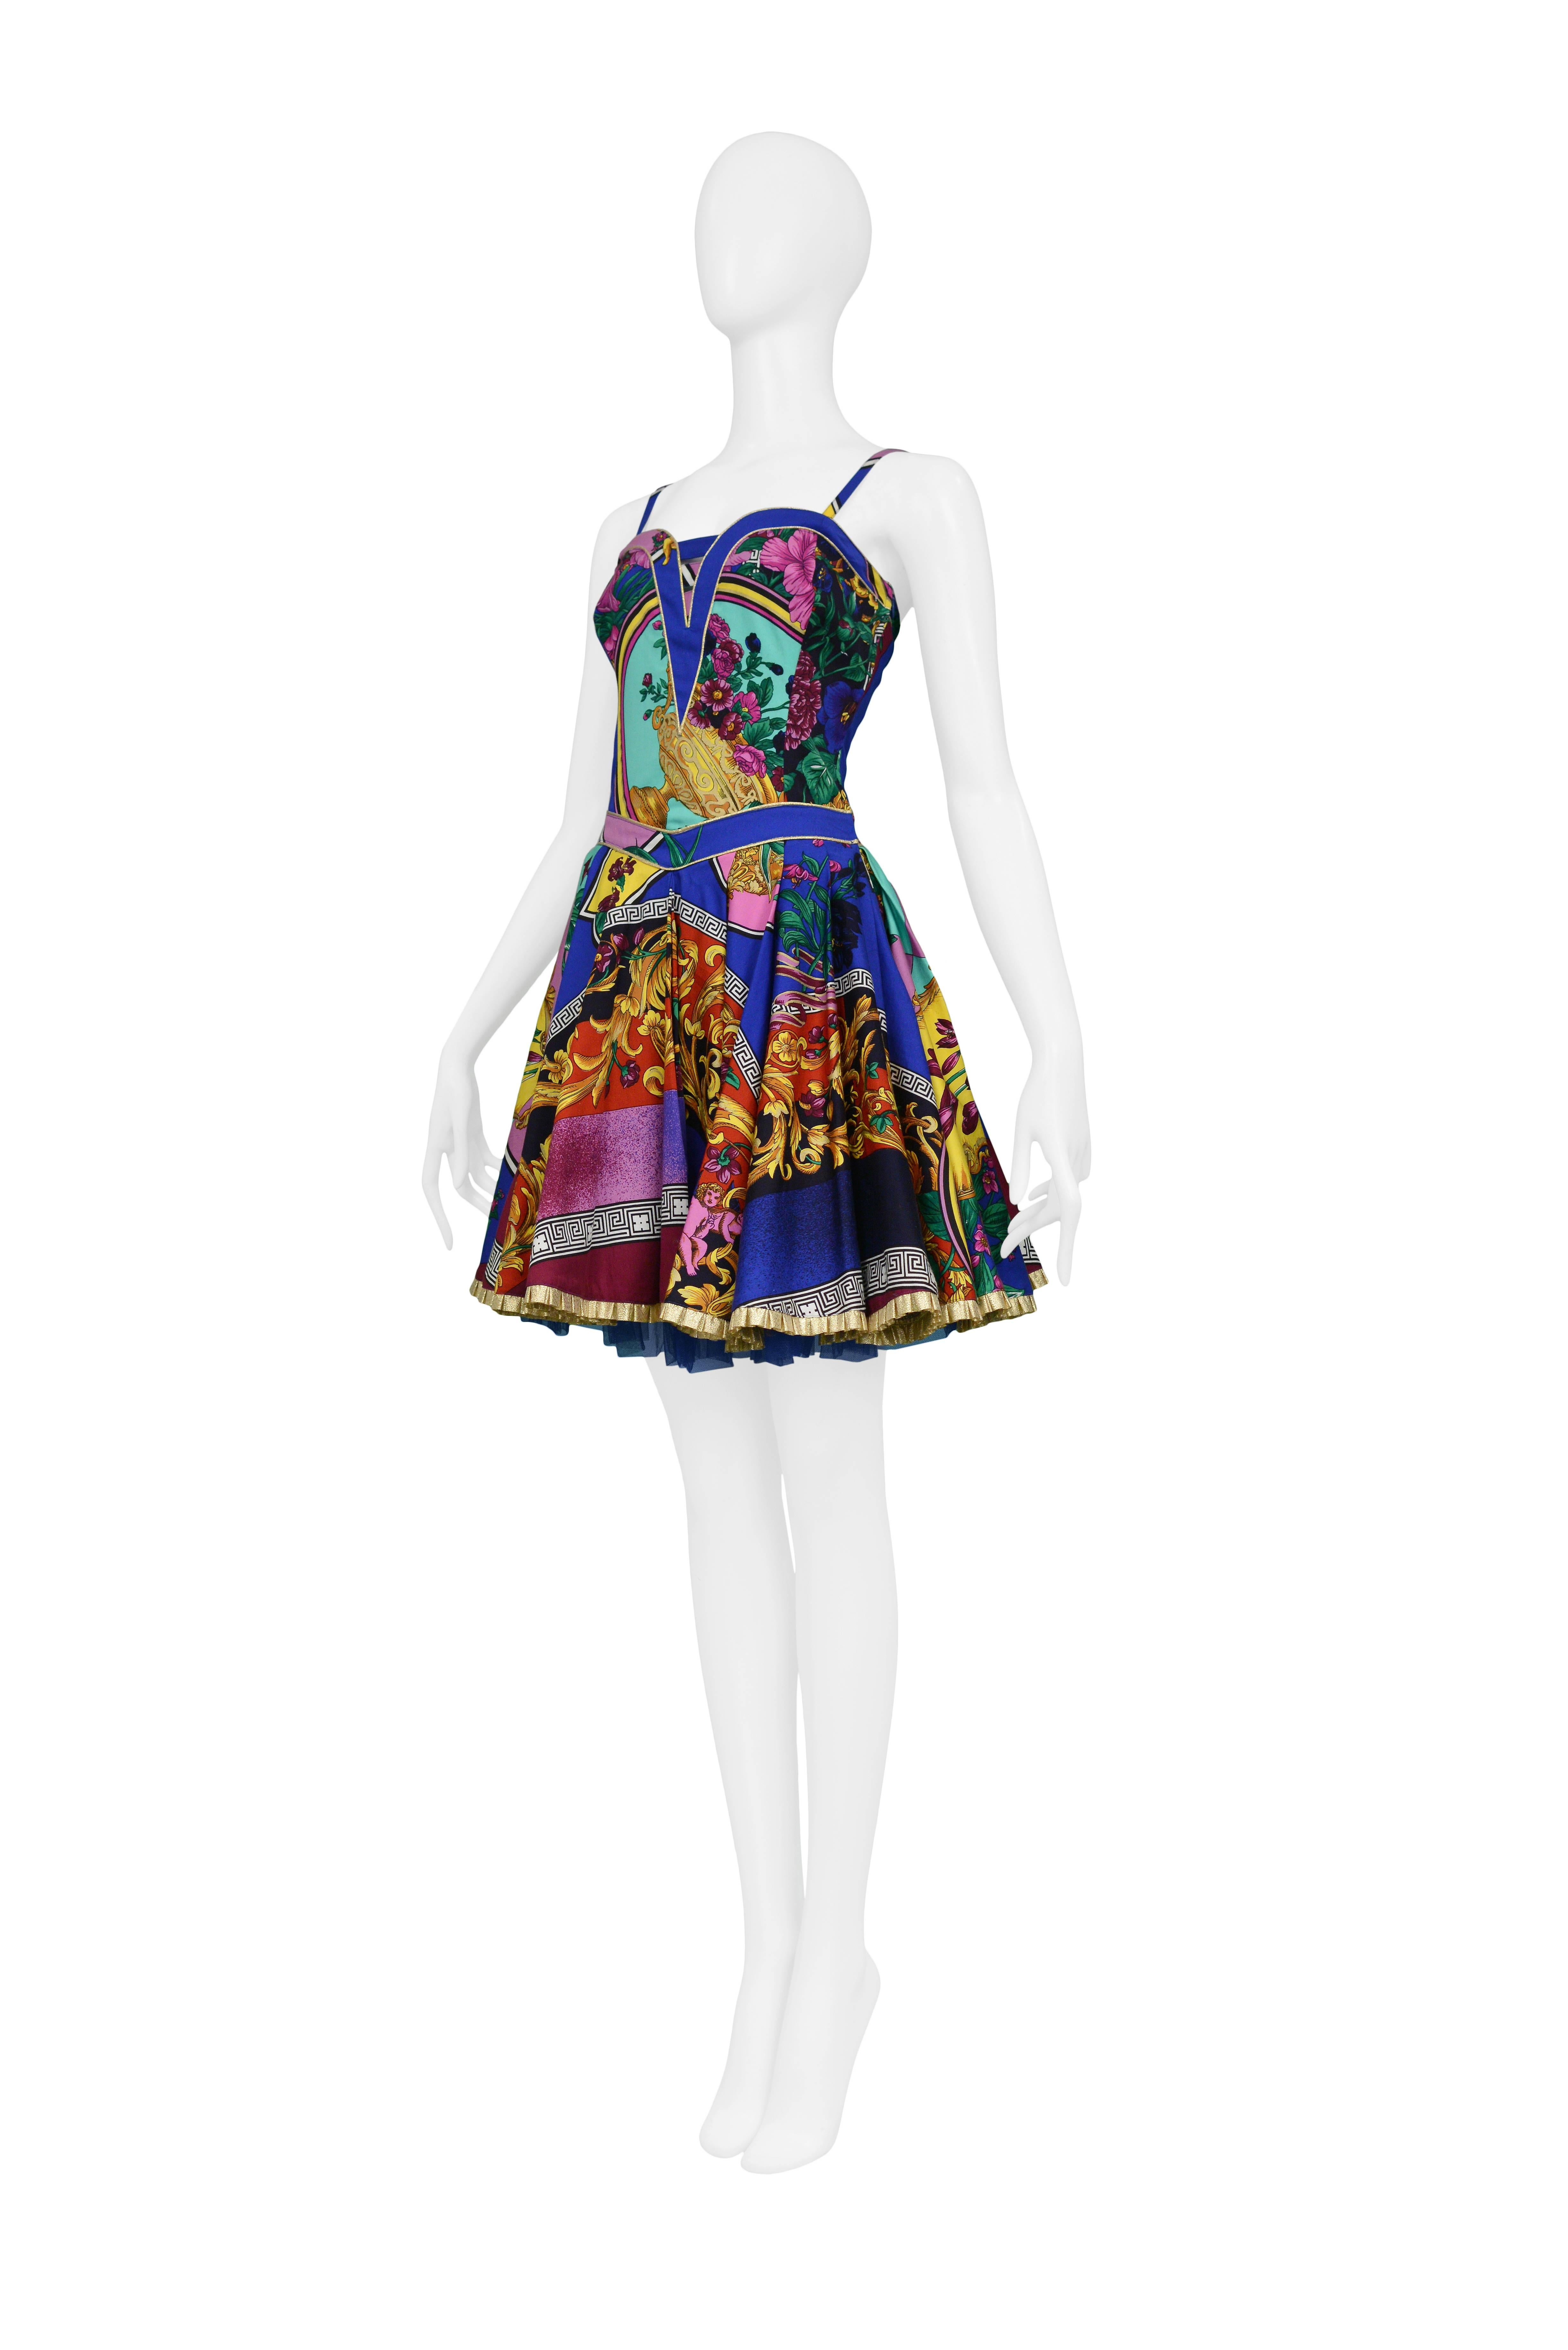 Rococo Party Frock, 1992
Condition : Deadstock Vintage
Size : 38
Iconic Gianni Versace Jeans Couture party frock with neo-Rococo print. Dress features a gold crinoline under skirt. This piece has never been worn and came with original tags.